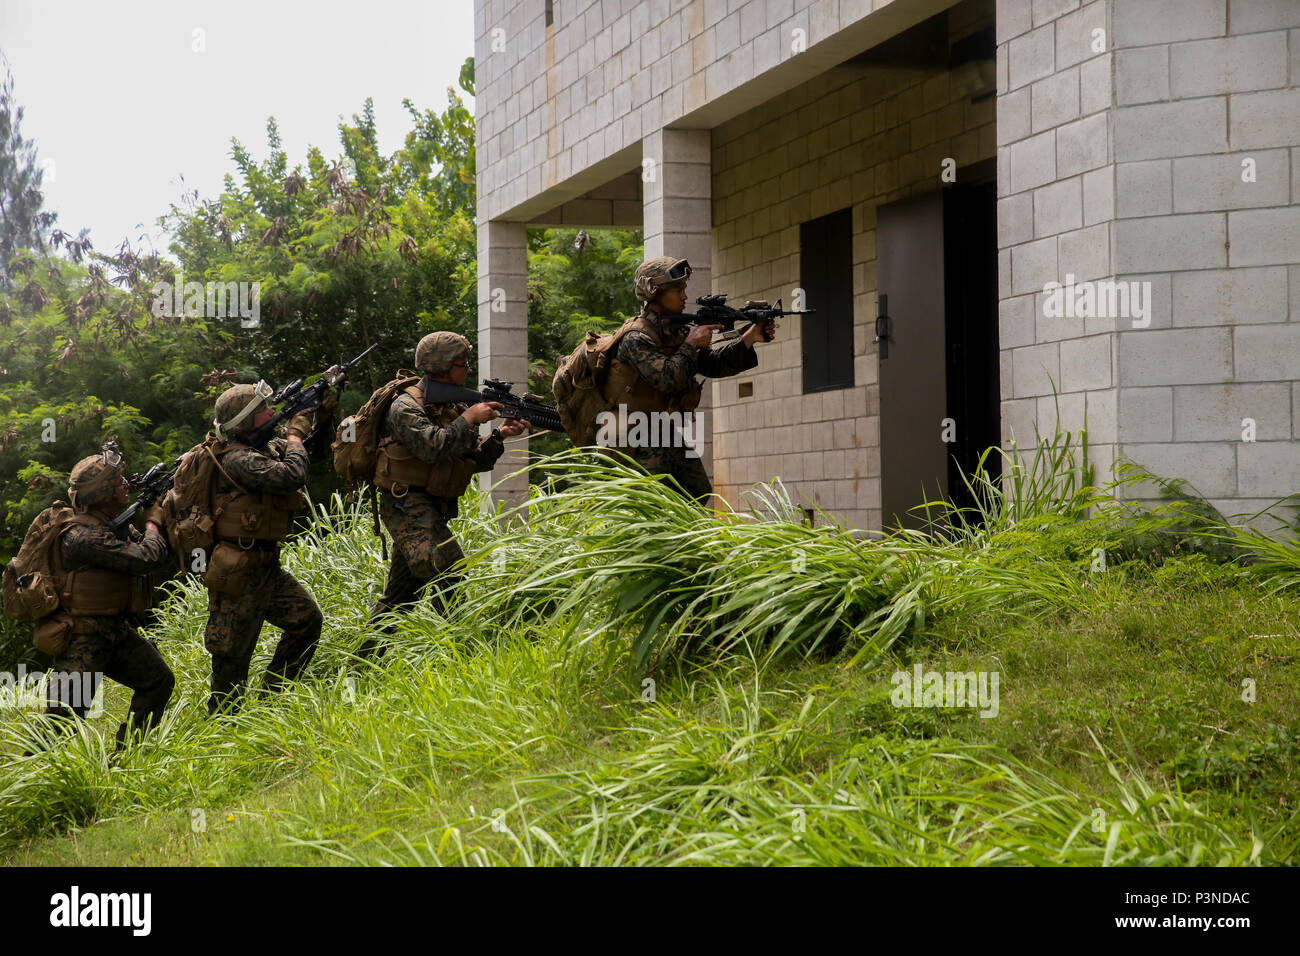 160714-M-JM737-059 KAHUKU TRAINING AREA, Hawaii (July 13, 2016) - A U.S. Marine fireteam from Golf Company, 2nd Battalion, 3rd Marines, approach their objective as part of a raid during Rim of the Pacific 2016. Twenty-six nations, 49 ships, six submarines, about 200 aircraft, and 25,000 personnel are participating in RIMPAC 16 from June 29 to Aug. 4 in and around the Hawaiian Islands and Southern California. The world’s largest international maritime exercise, RIMPAC provides a unique training opportunity while fostering and sustaining cooperative relationships between participants critical to Stock Photo